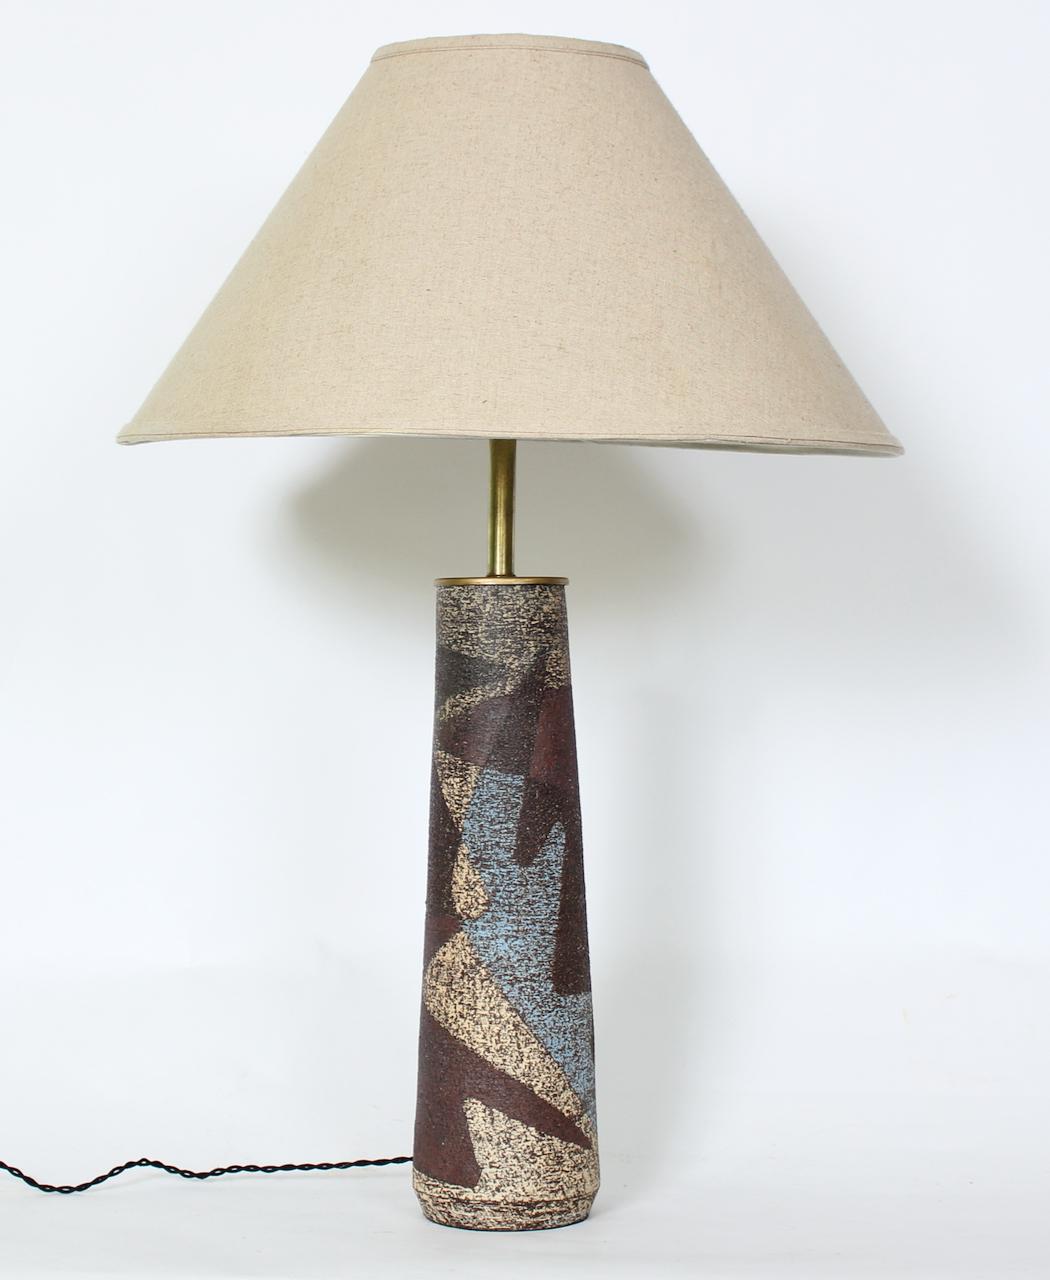 Dutch Tall Zaalberg Pottery Blue & Brown Palette Glazed Pottery Table Lamp, 1950's For Sale